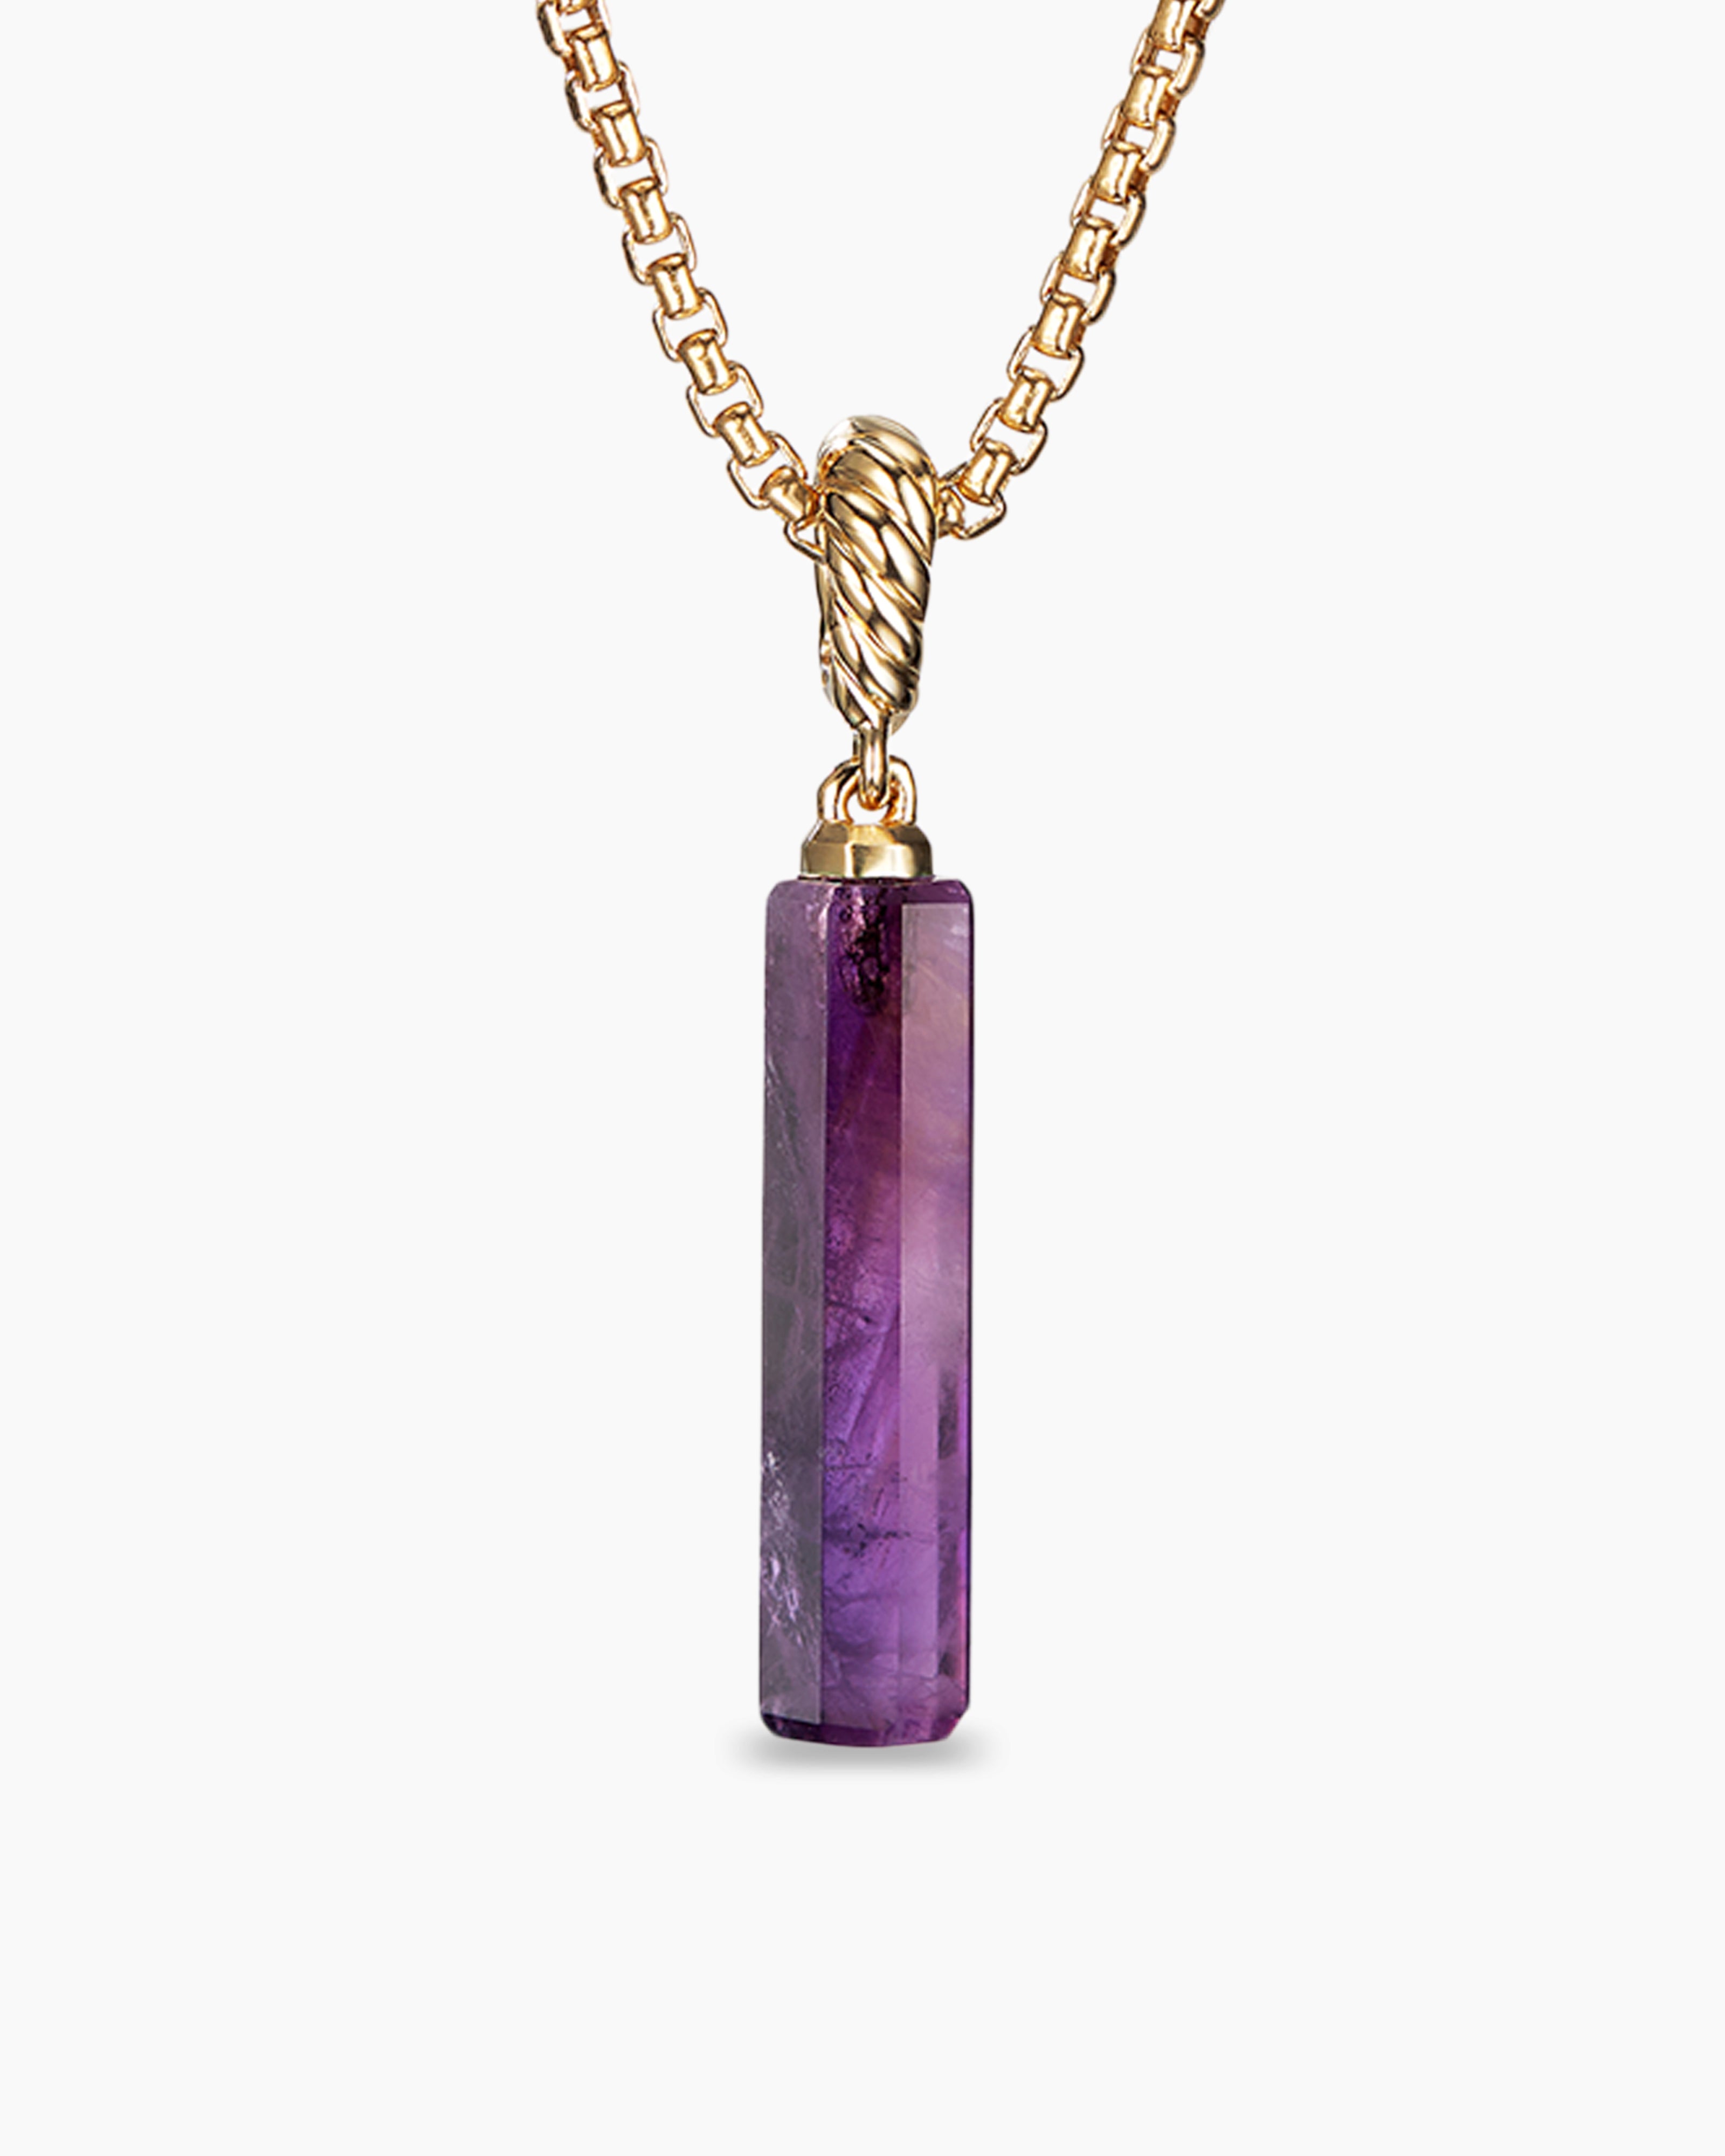 Genuine Amethyst and Diamond Necklace, 14k Solid Gold Gemstone Necklac